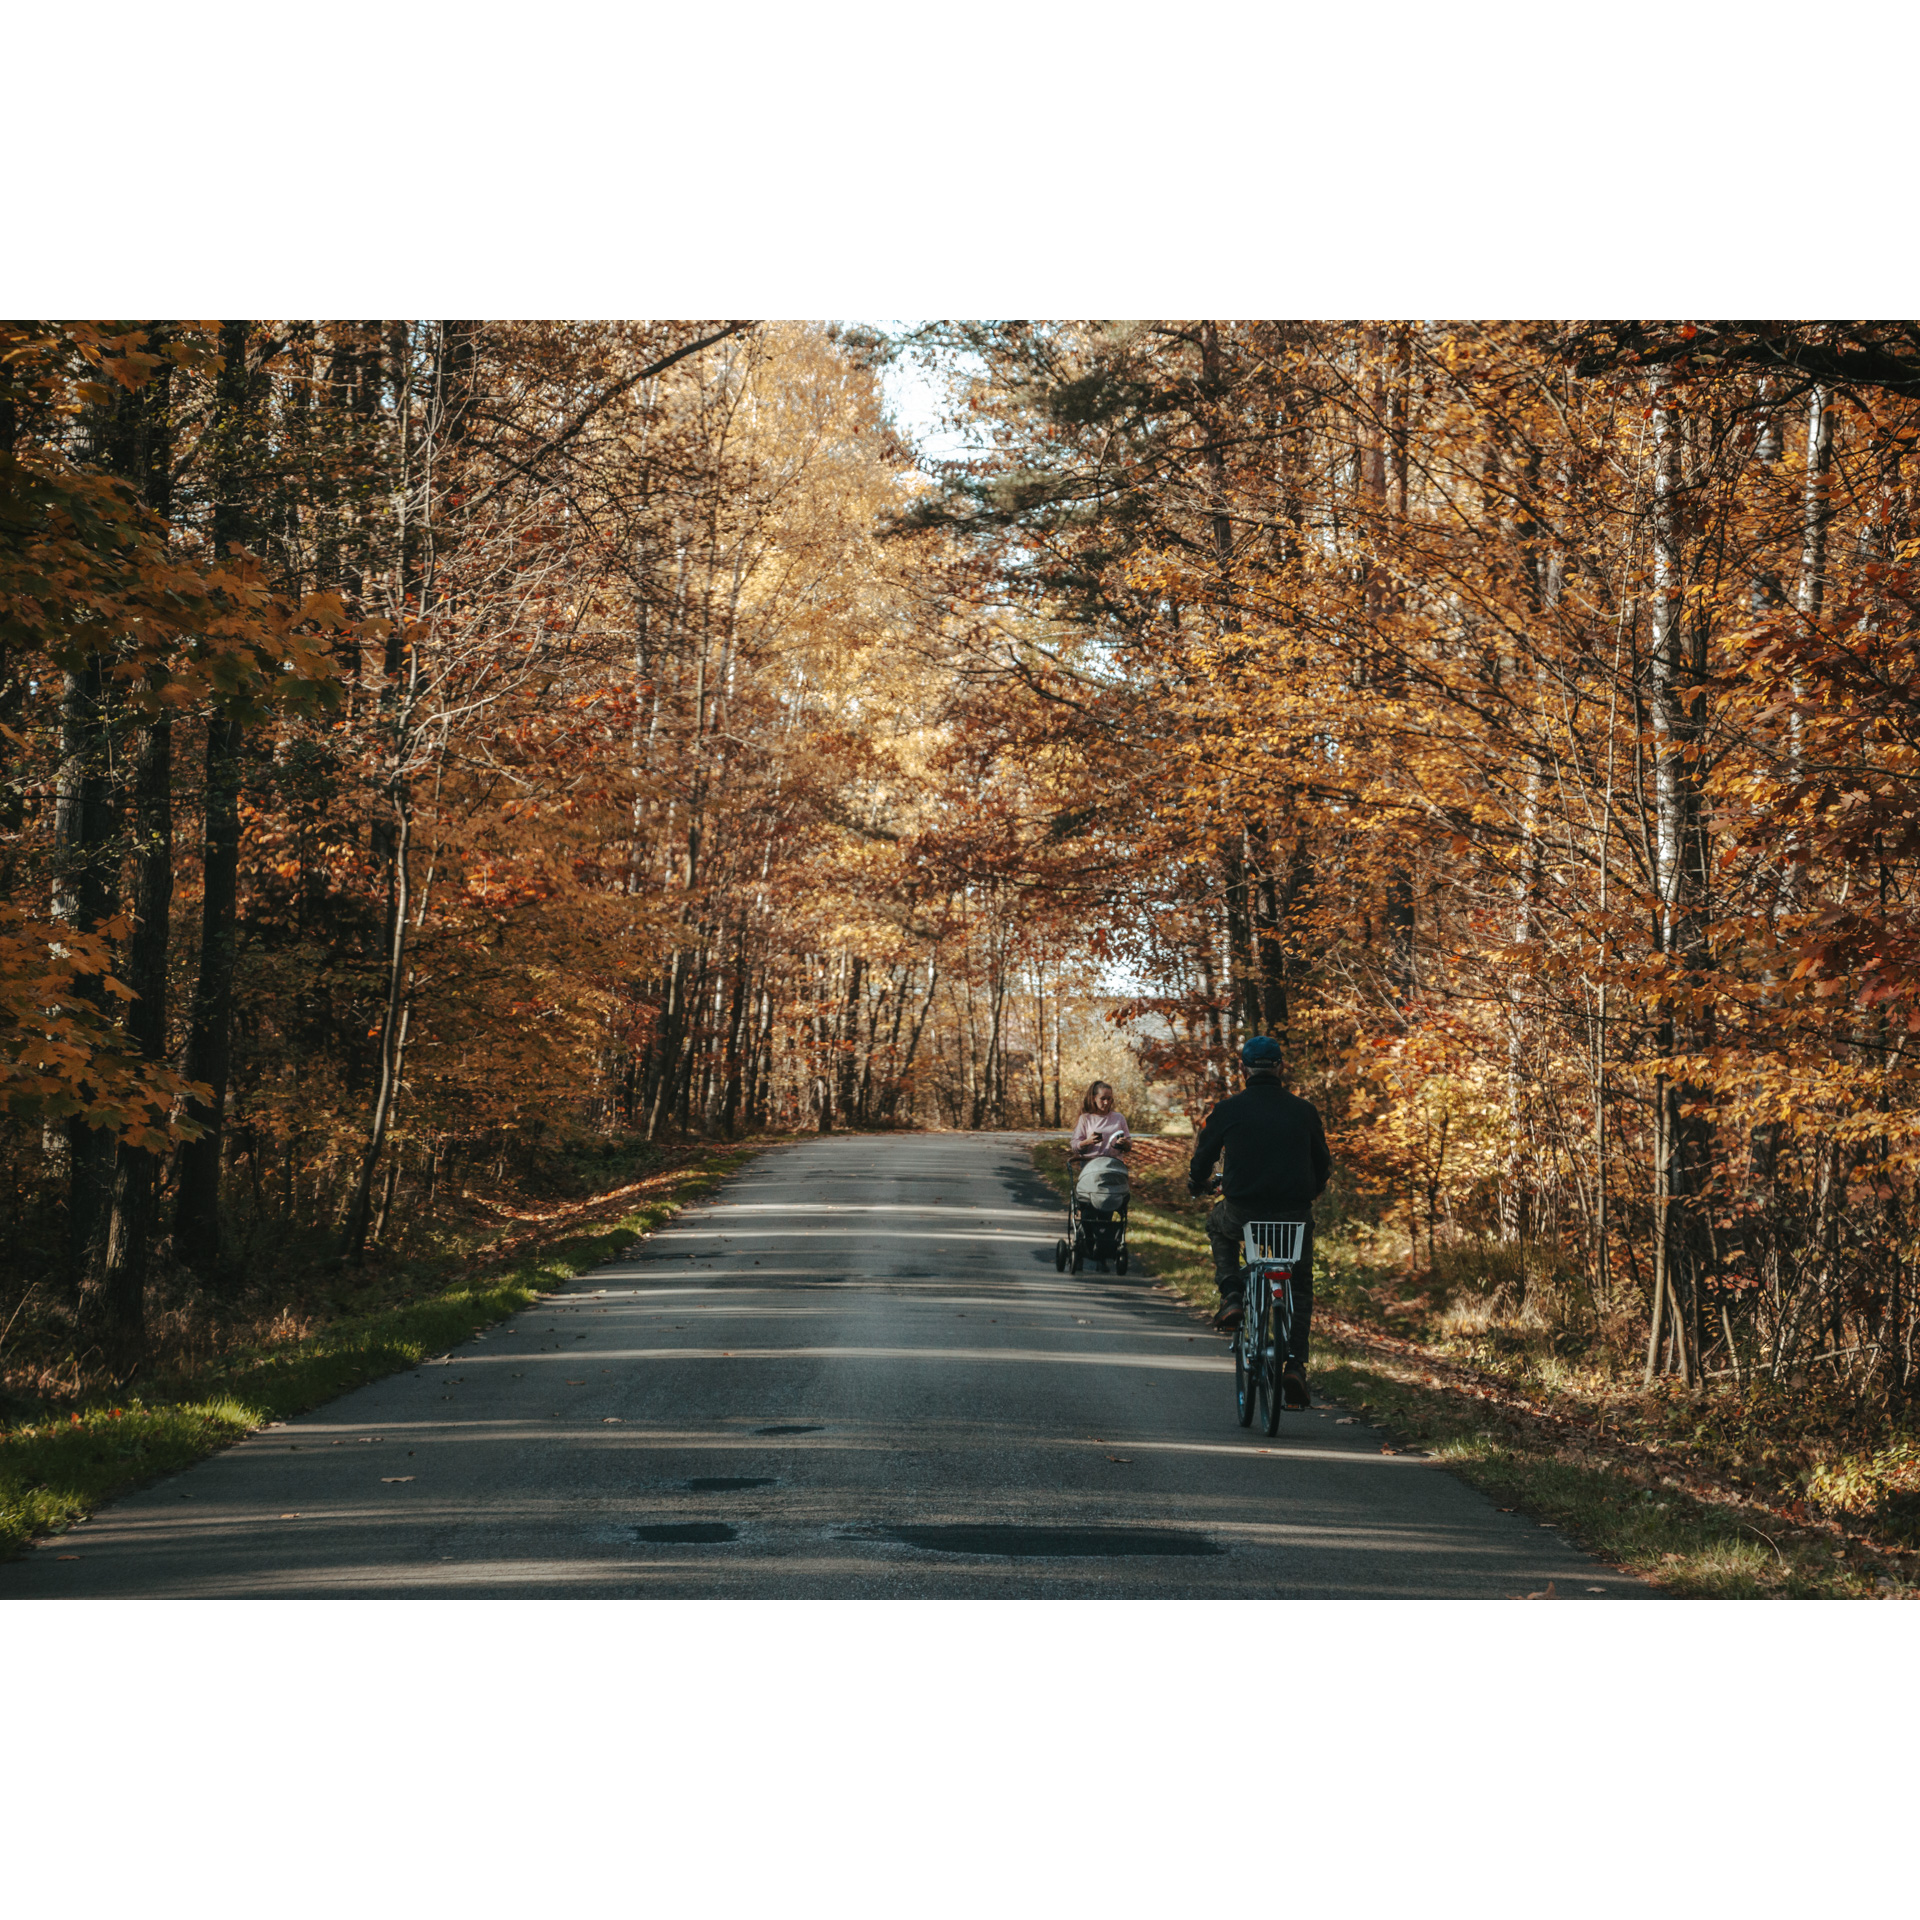 A man on a bicycle riding an asphalt road through a forest among tall trees, heading towards a woman with a baby carriage